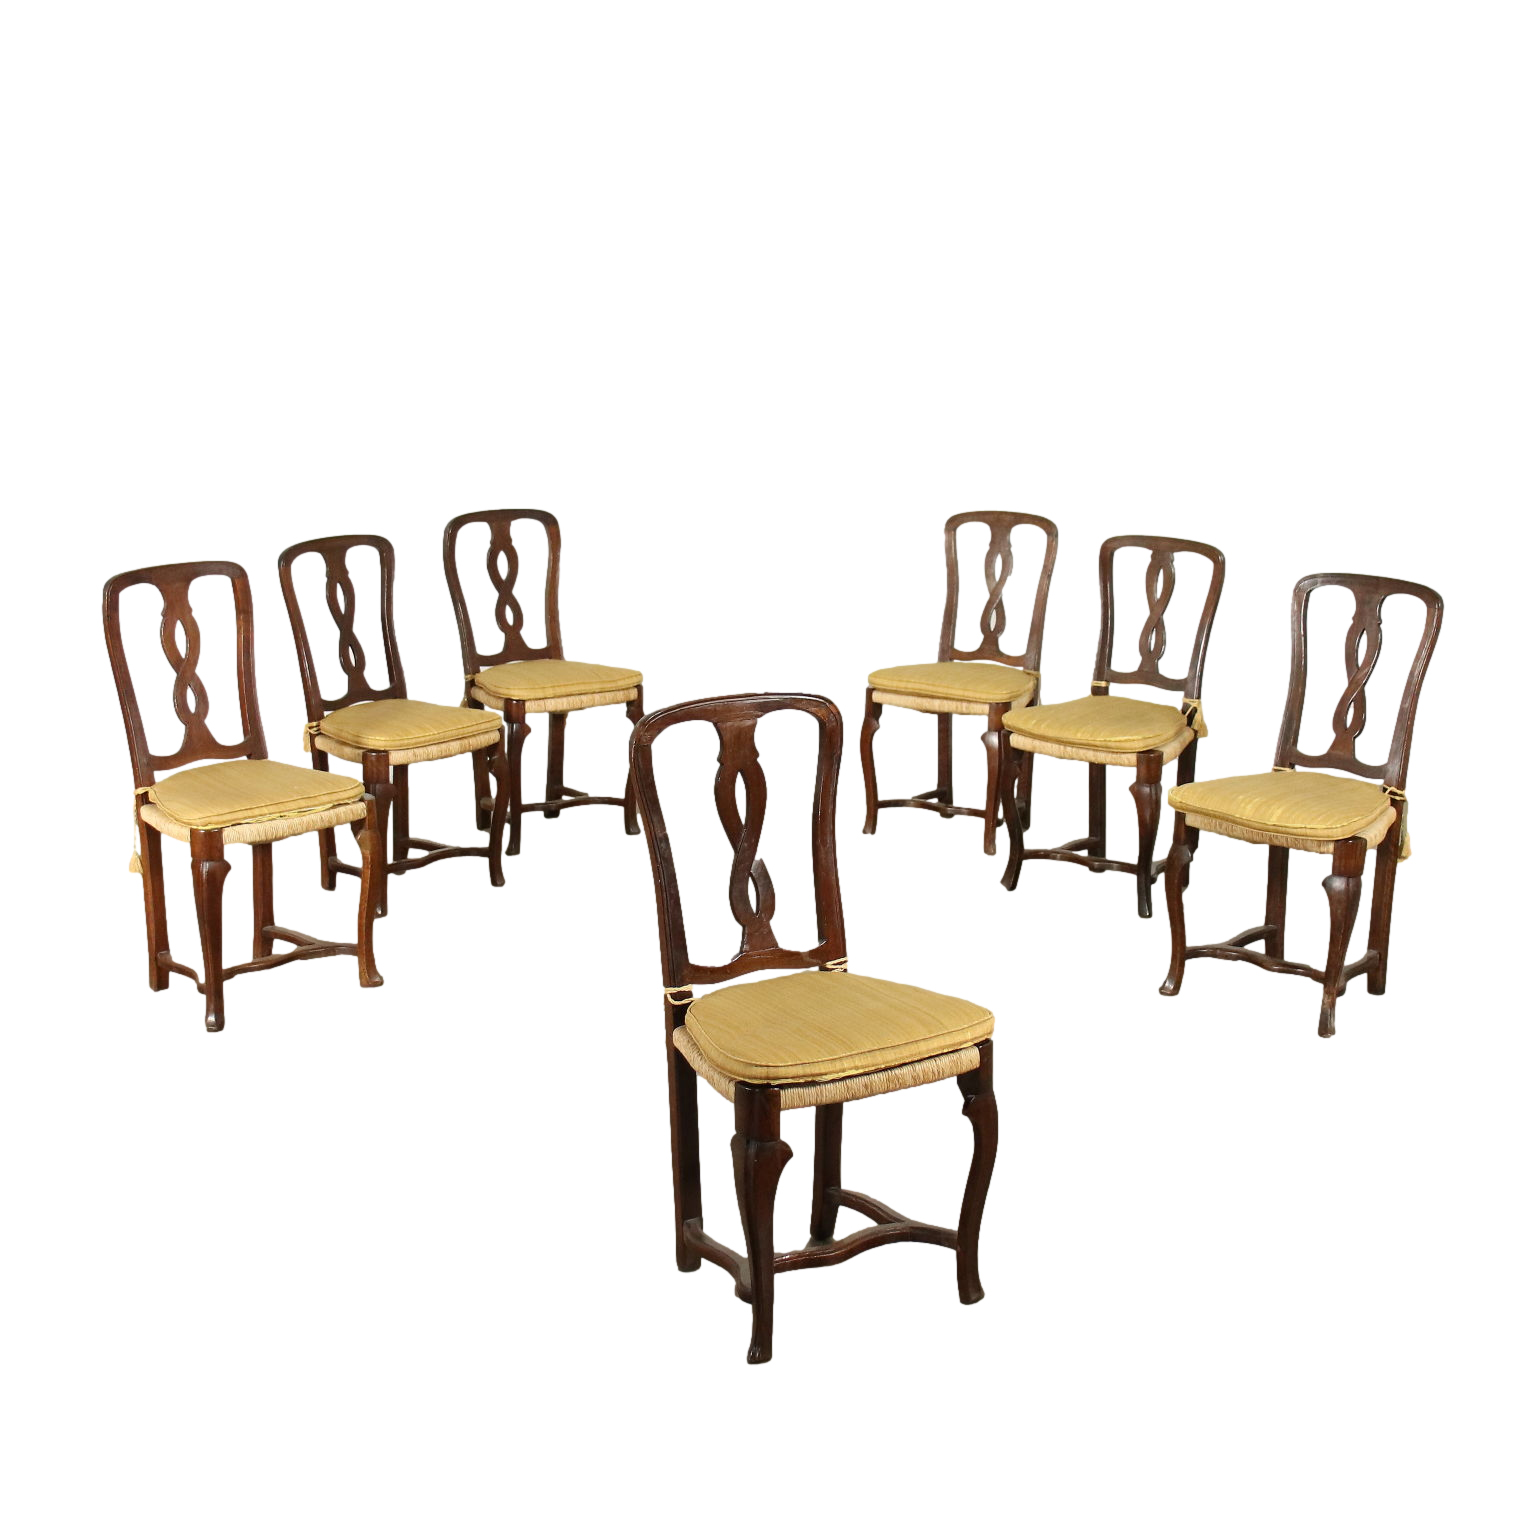 Renaissance Chair With Armrests - Chair With Armrests - Modenese